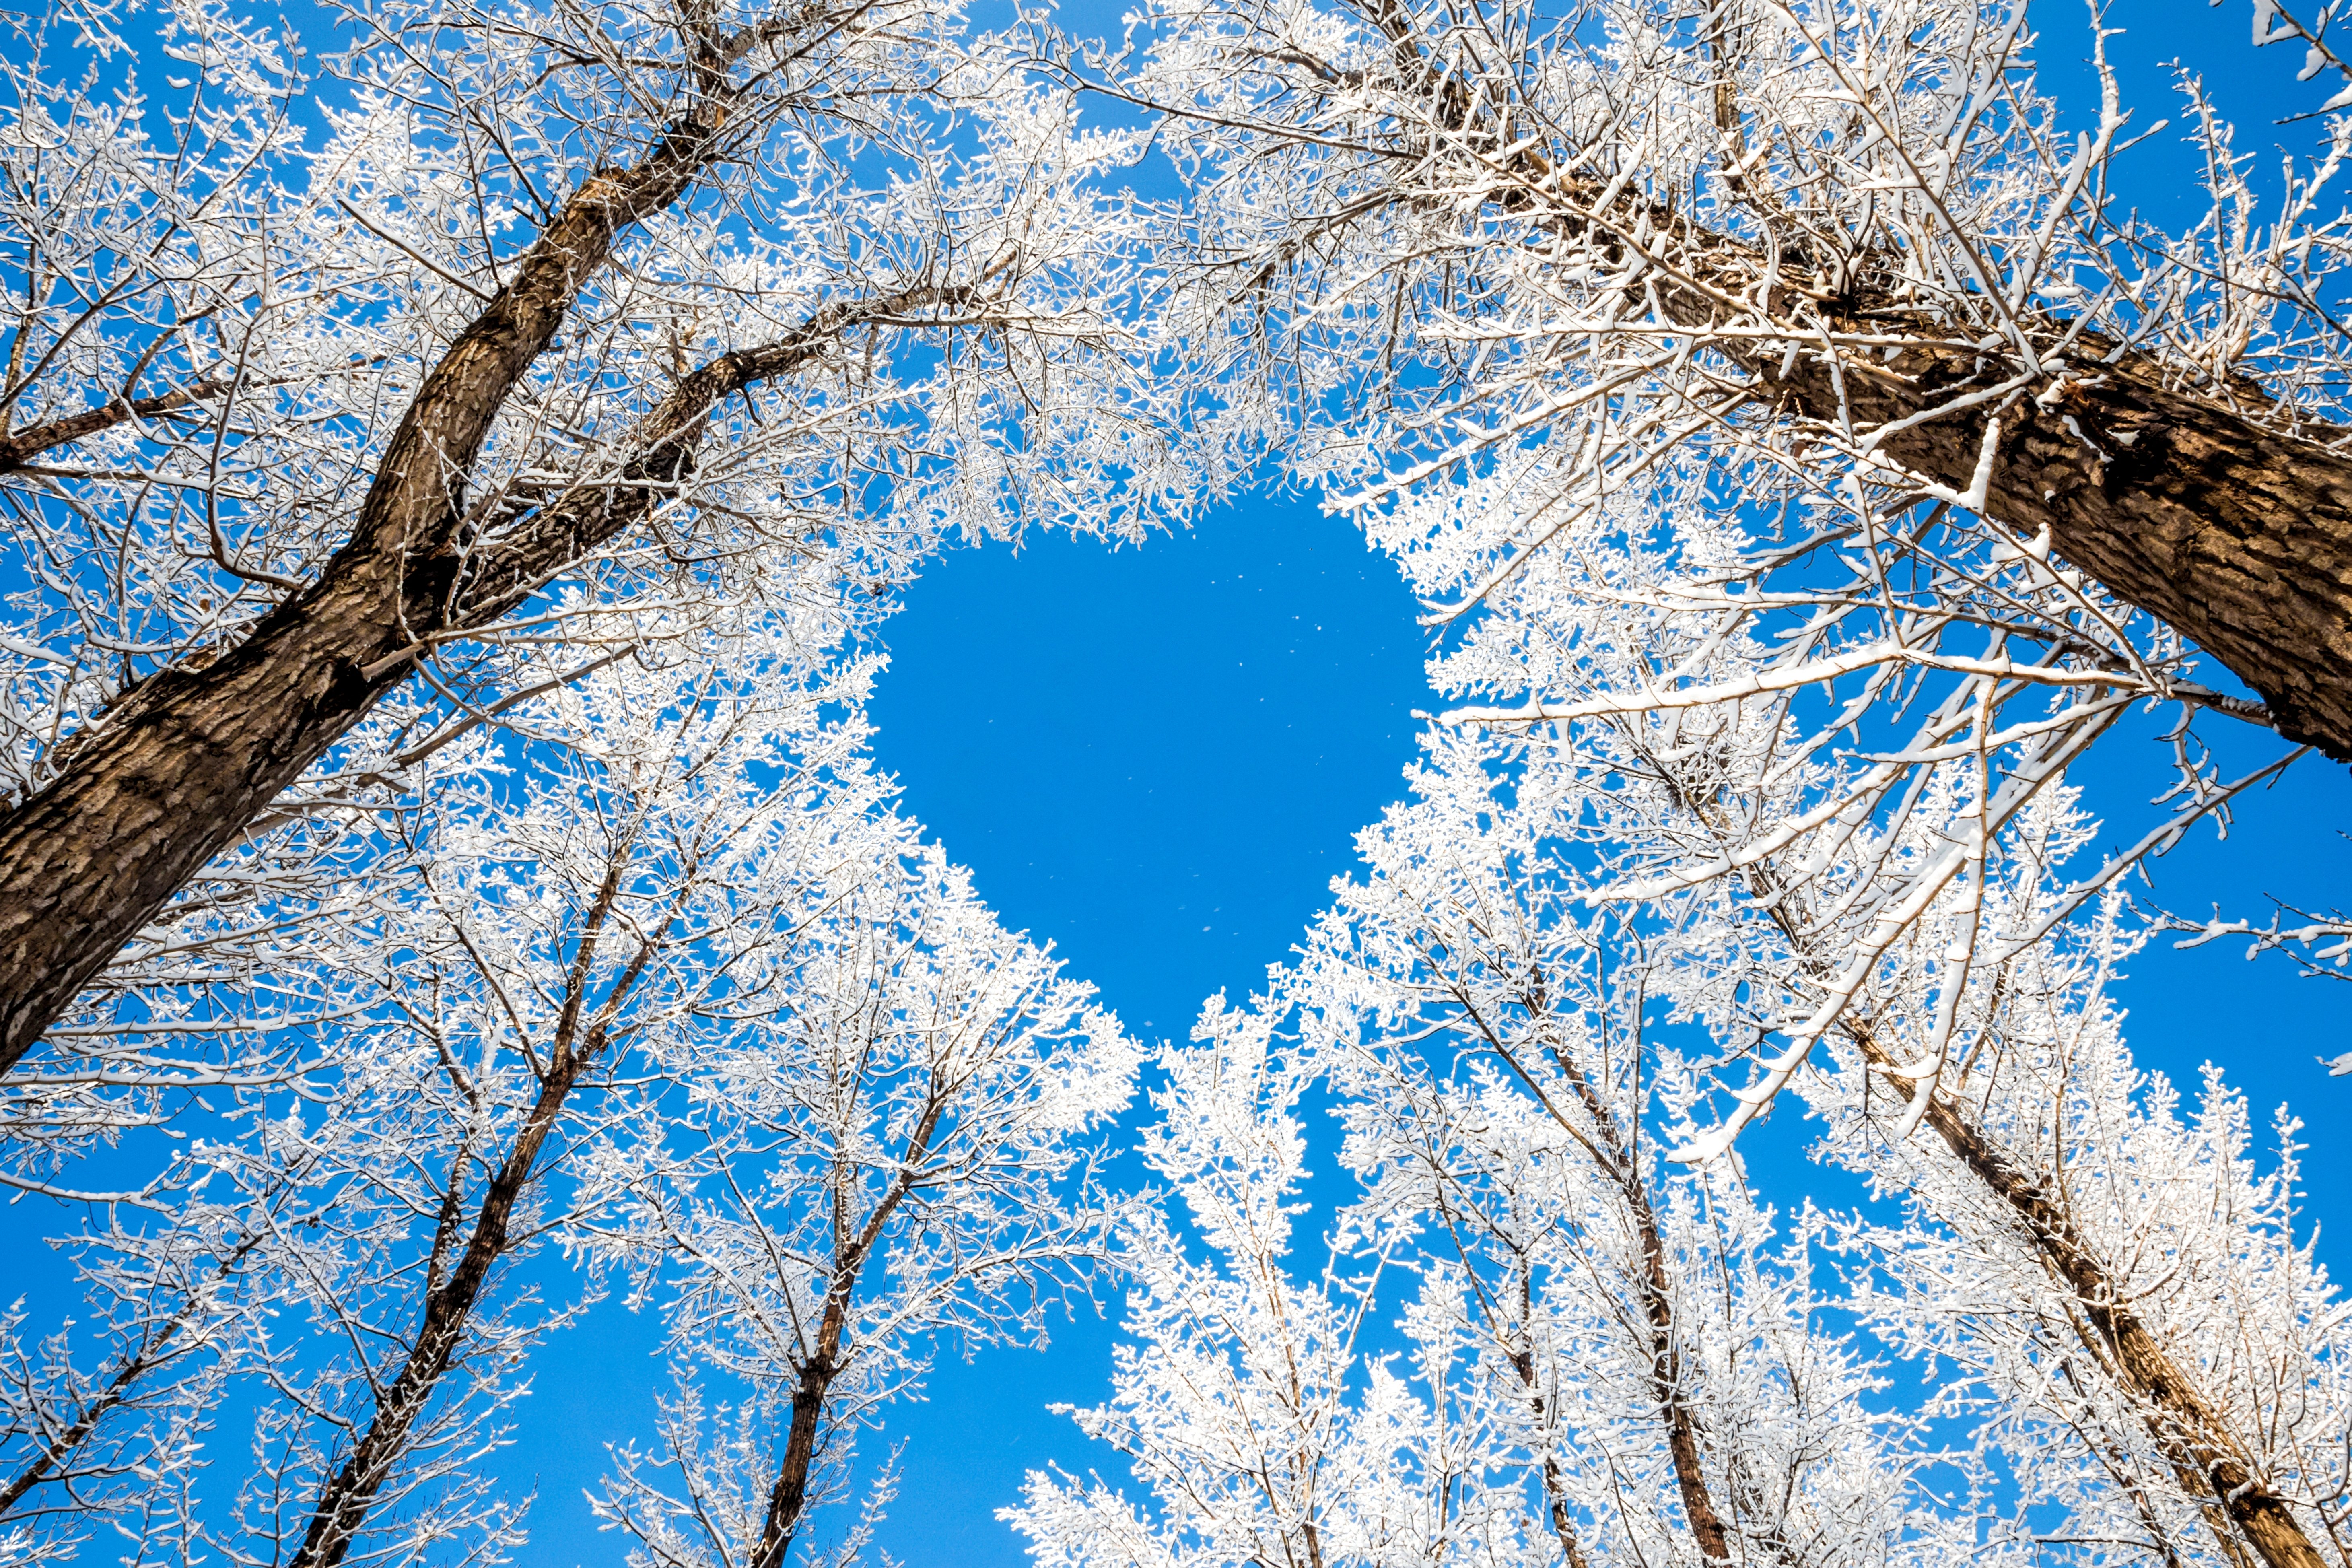 trees, Branches, Winter, Nature, Snow, Sky, Heart, Heart, Love Wallpaper